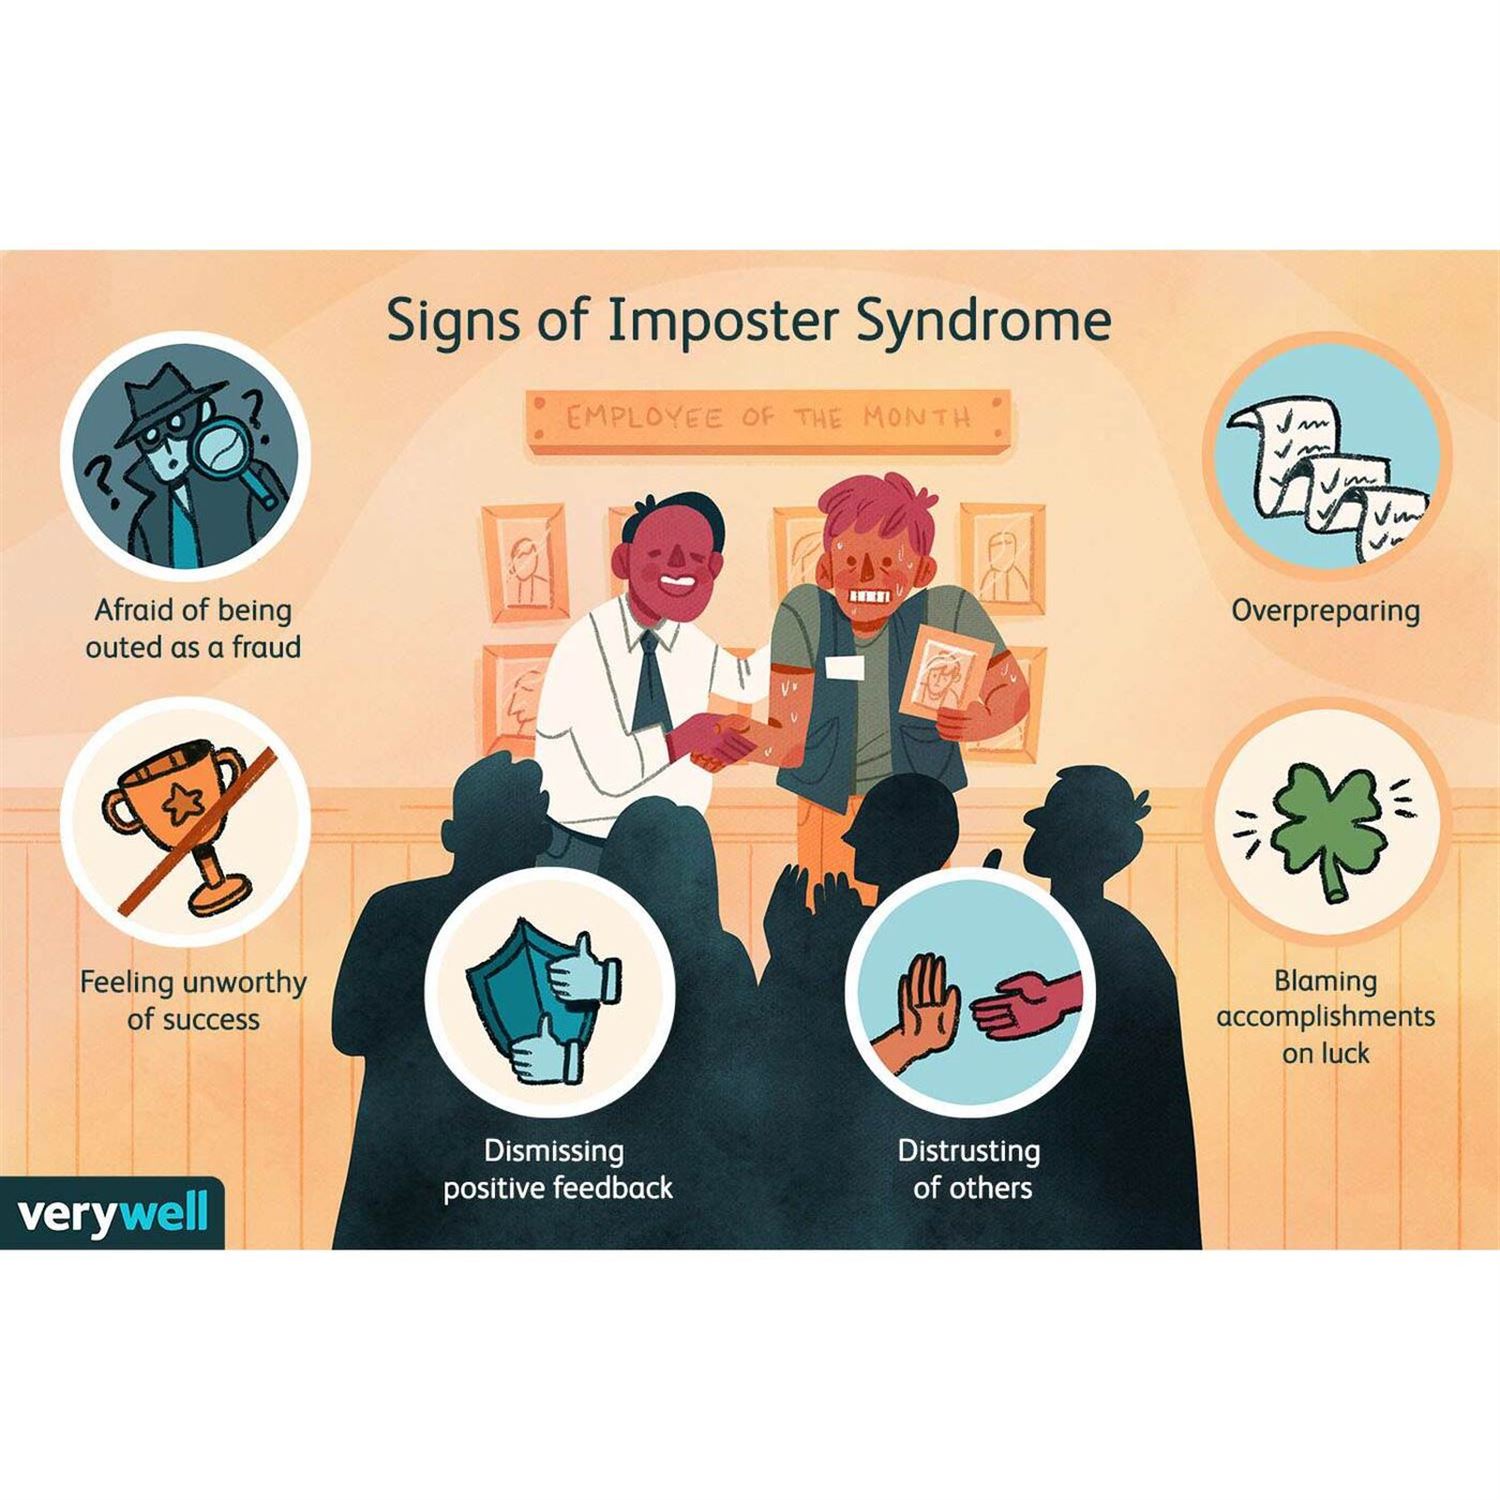 Do we get imposter syndrome?